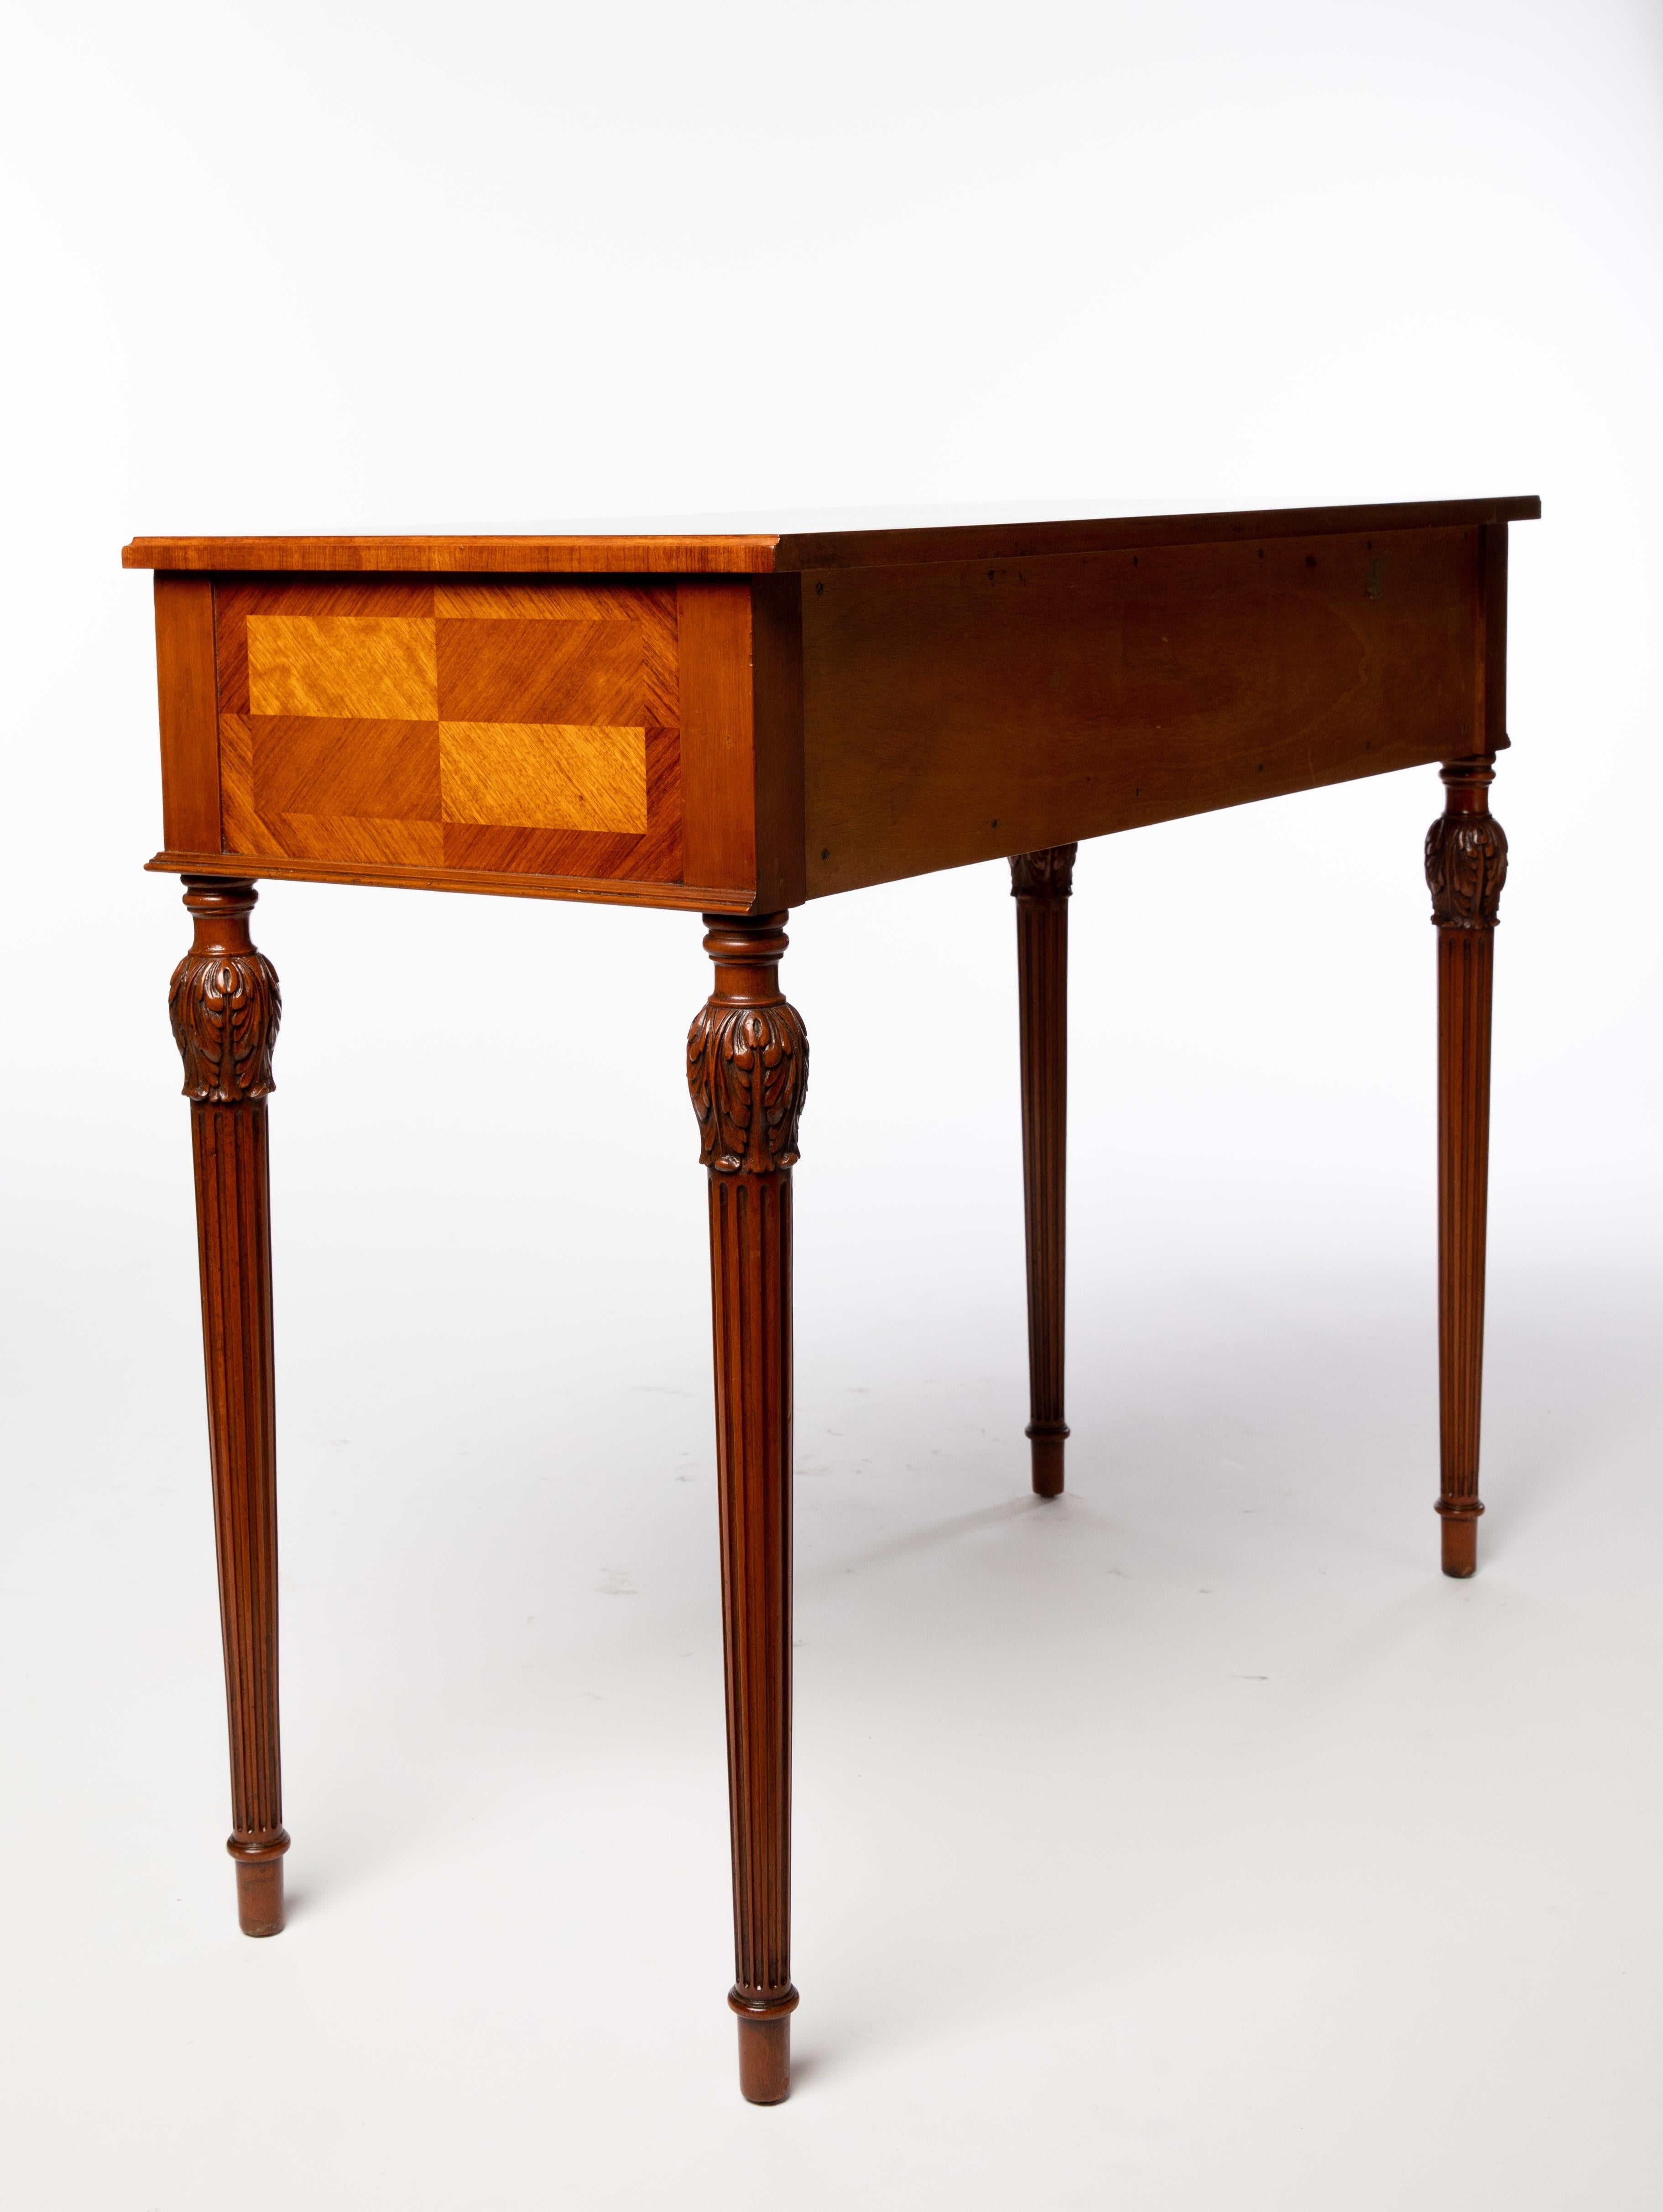 Hand-Carved Carved Mahogany Console Hall Table